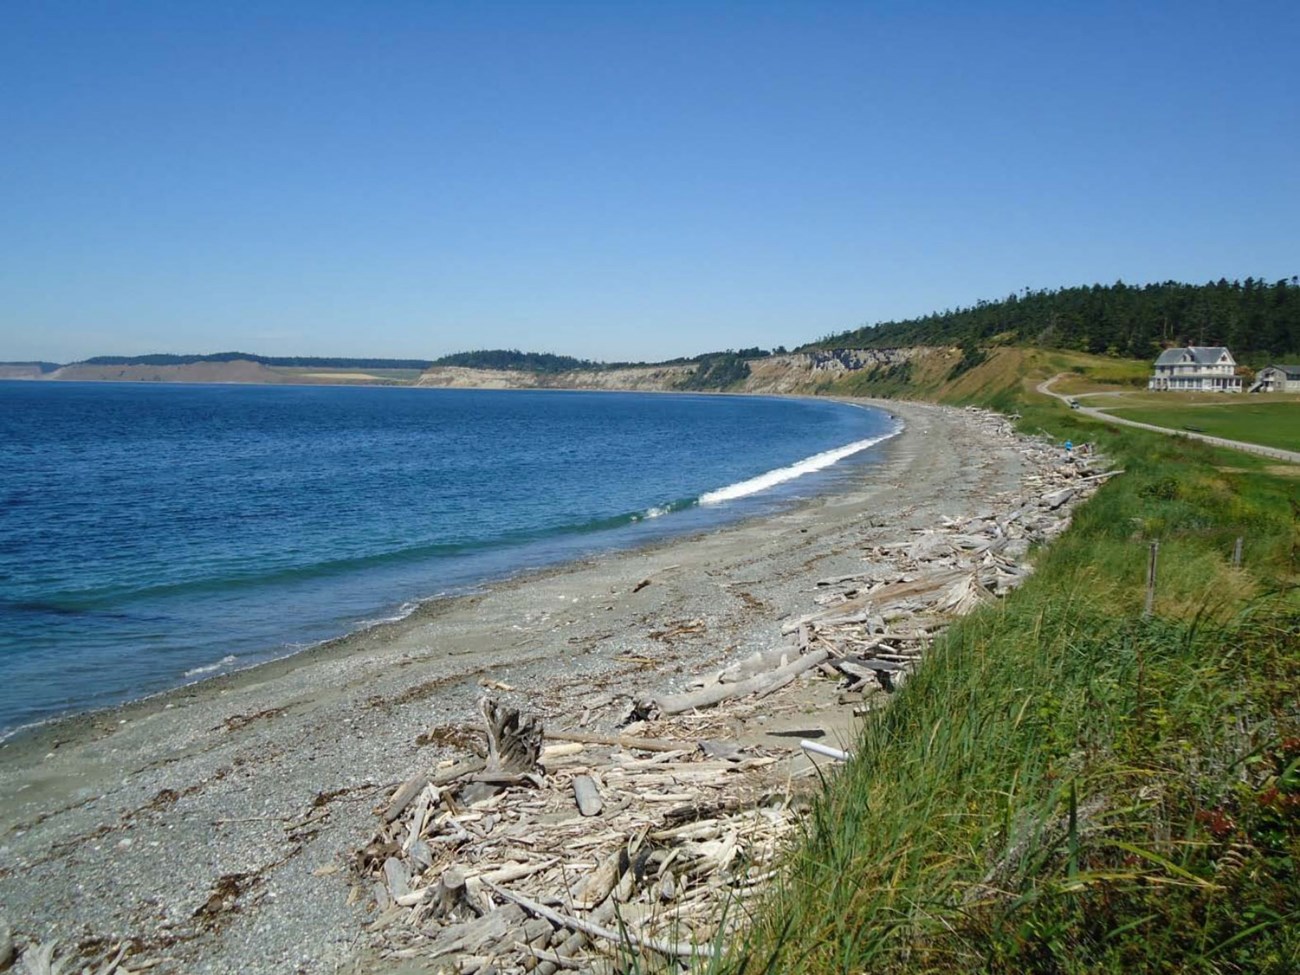 Photo of curving shoreline, pebble beach with driftwood, adjacent grassland, and distant bluffs, building, and forested hills.